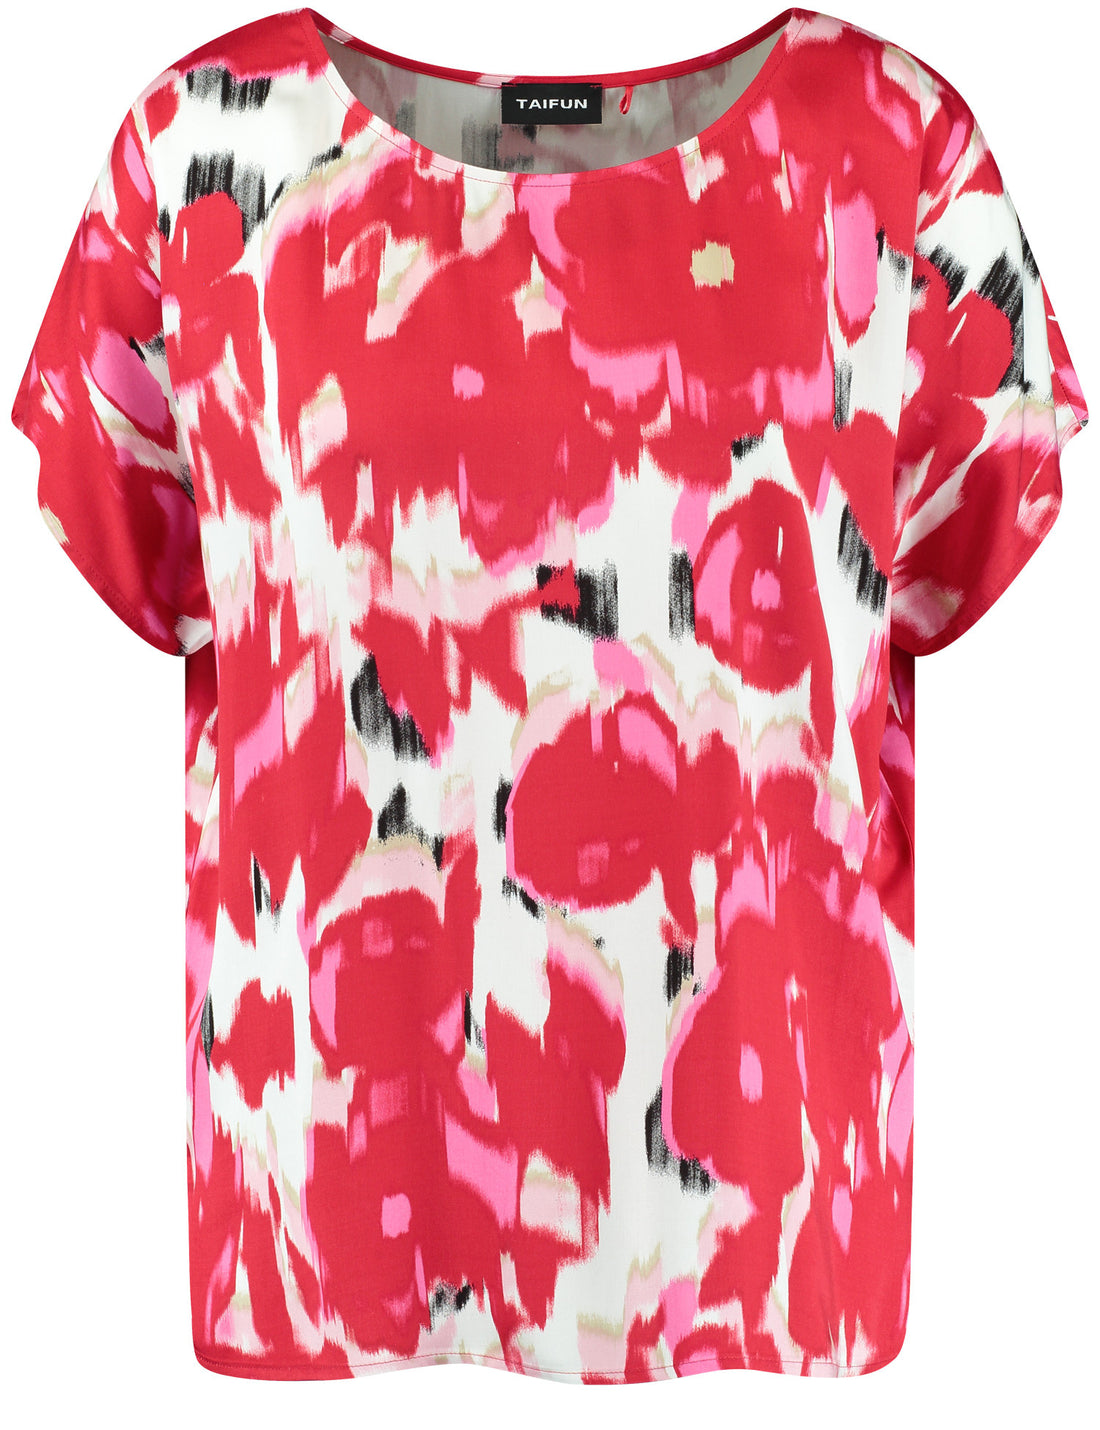 Blouse Top With An All-Over Floral Print